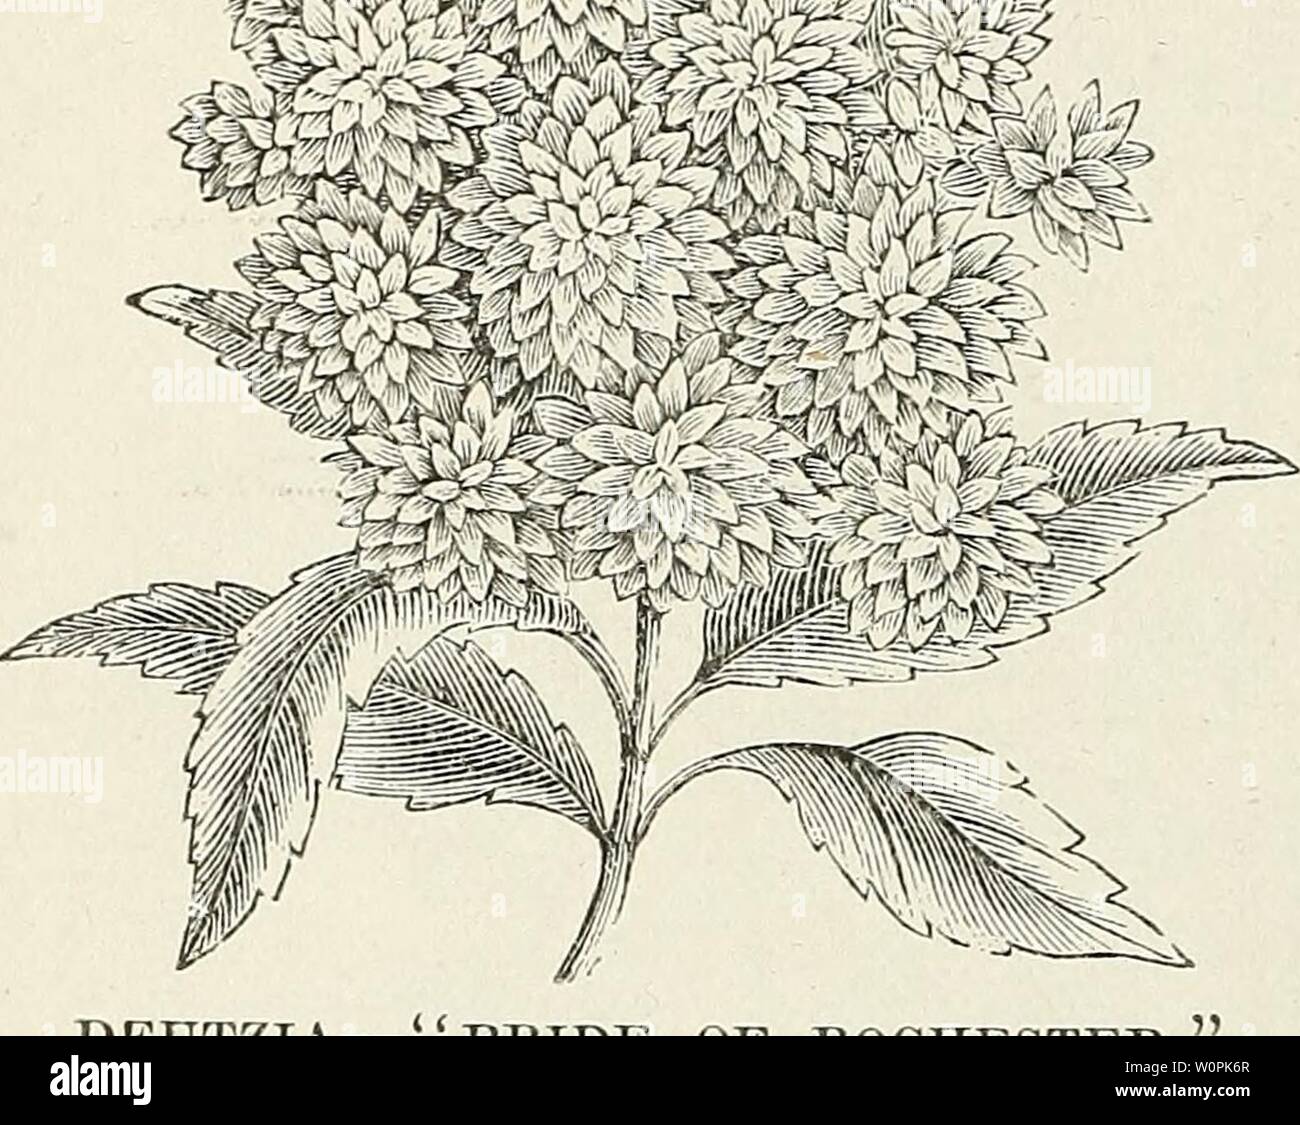 Archive image from page 75 of Descriptive catalogue of ornamental trees,. Descriptive catalogue of ornamental trees, shrubs, hardy perennial plants, etc. : twenty-fifth edition descriptivecatal1882ellw Year: 1882  If    DEUTZIA—' PRIDE OF ROCHESTER. (&gt;3 Natural, Size.) D. c. var. flore alba pleiio. Similar in habit to the preceding, but pure white and double. var. 'Pride of Roches- ter.' A variety raised from Deutzia crenata flore pleno, and producing large double white flowers; the back of the petals being slightly tinged with rose. It excels all of the older sorts in size of flower, lengt Stock Photo